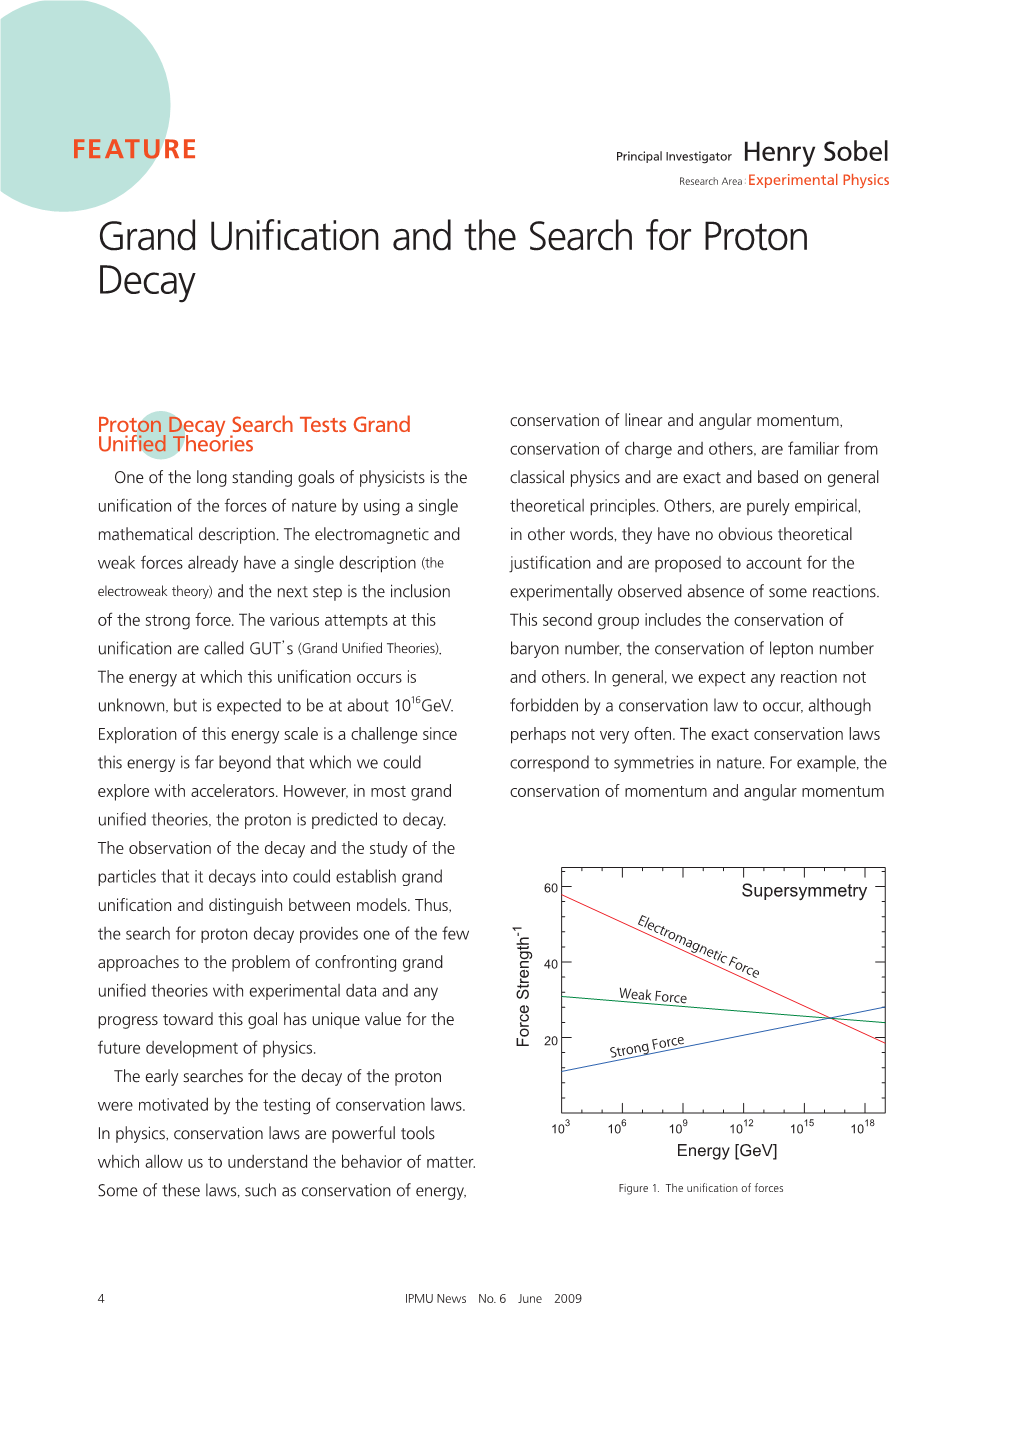 Grand Unification and the Search for Proton Decay